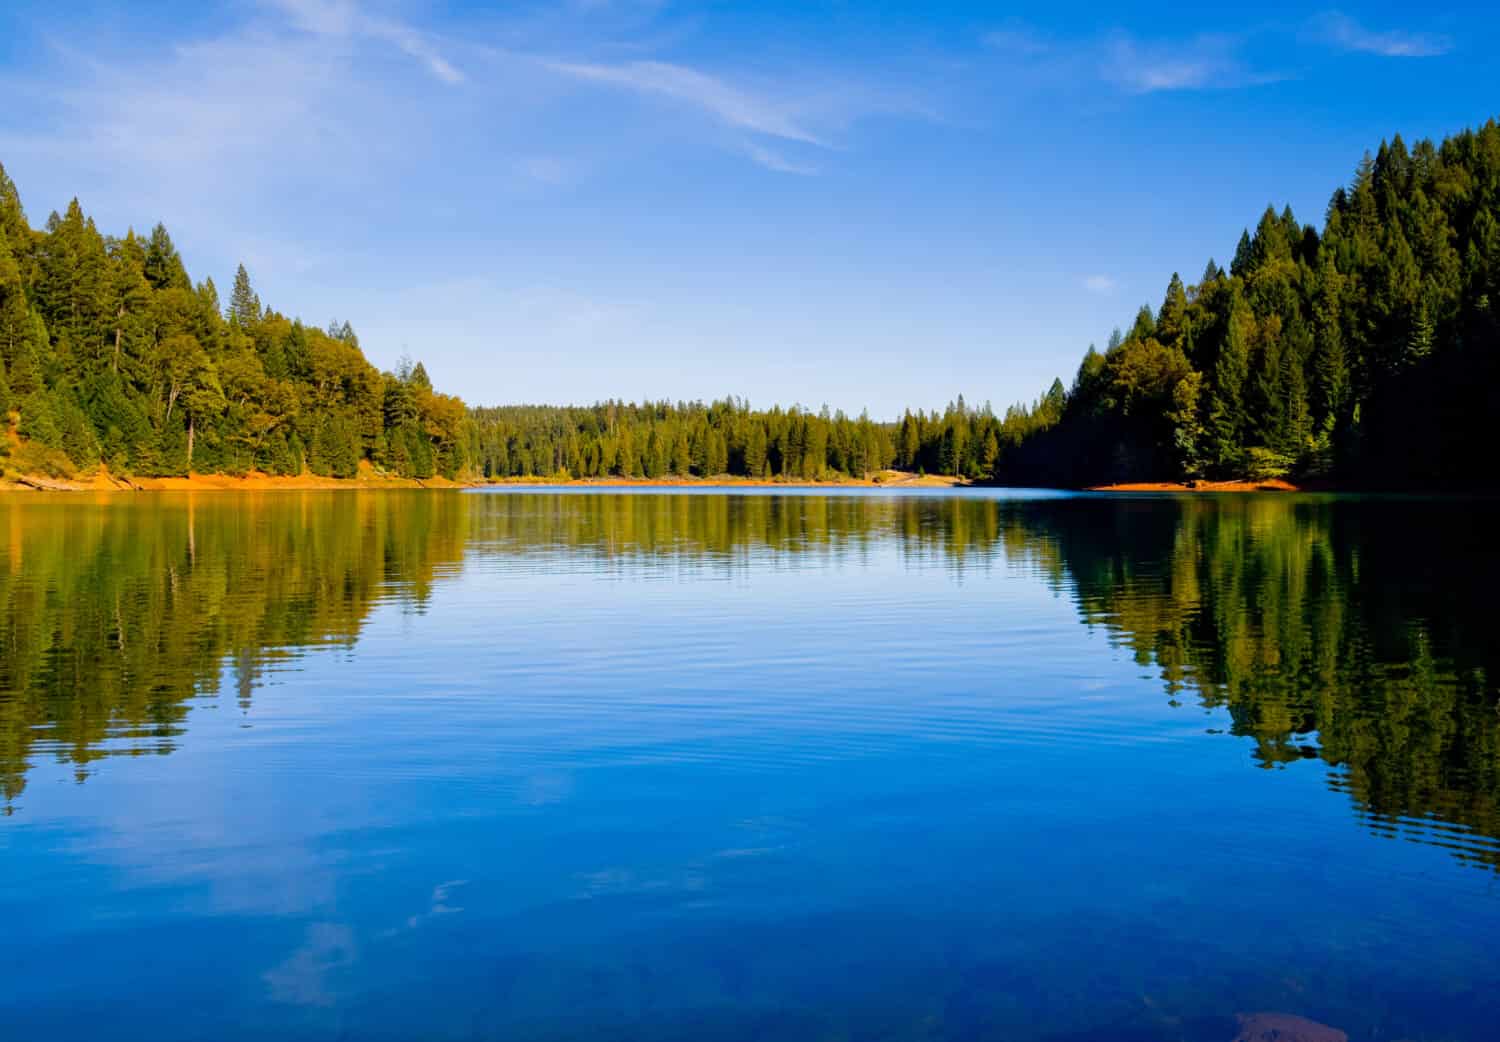 Reflection in clear blue lake in Northern California